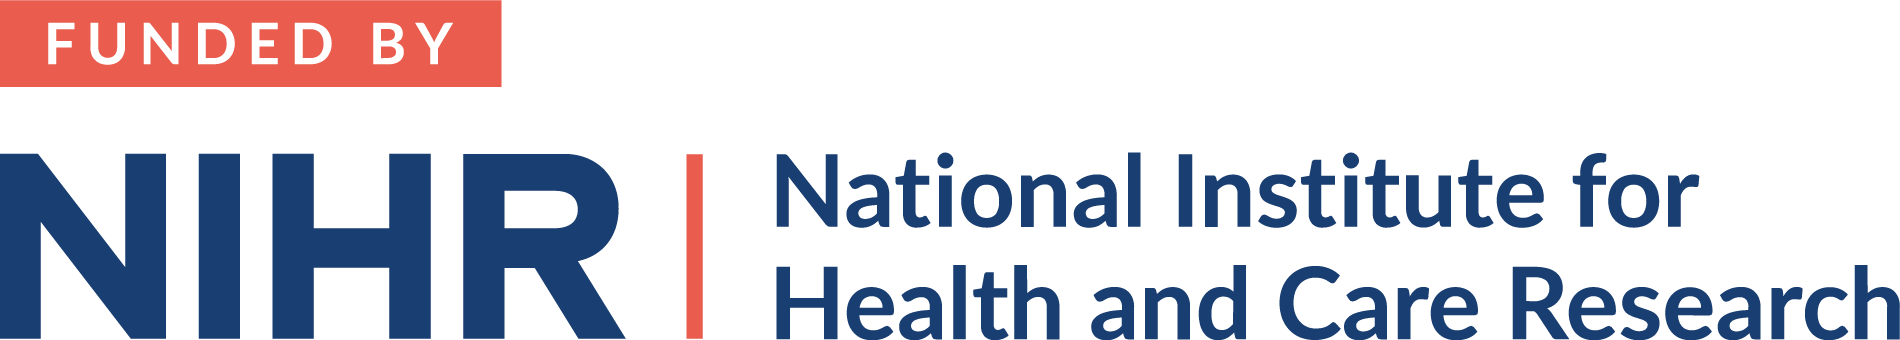 NIHR - National Institute for Health Research logo